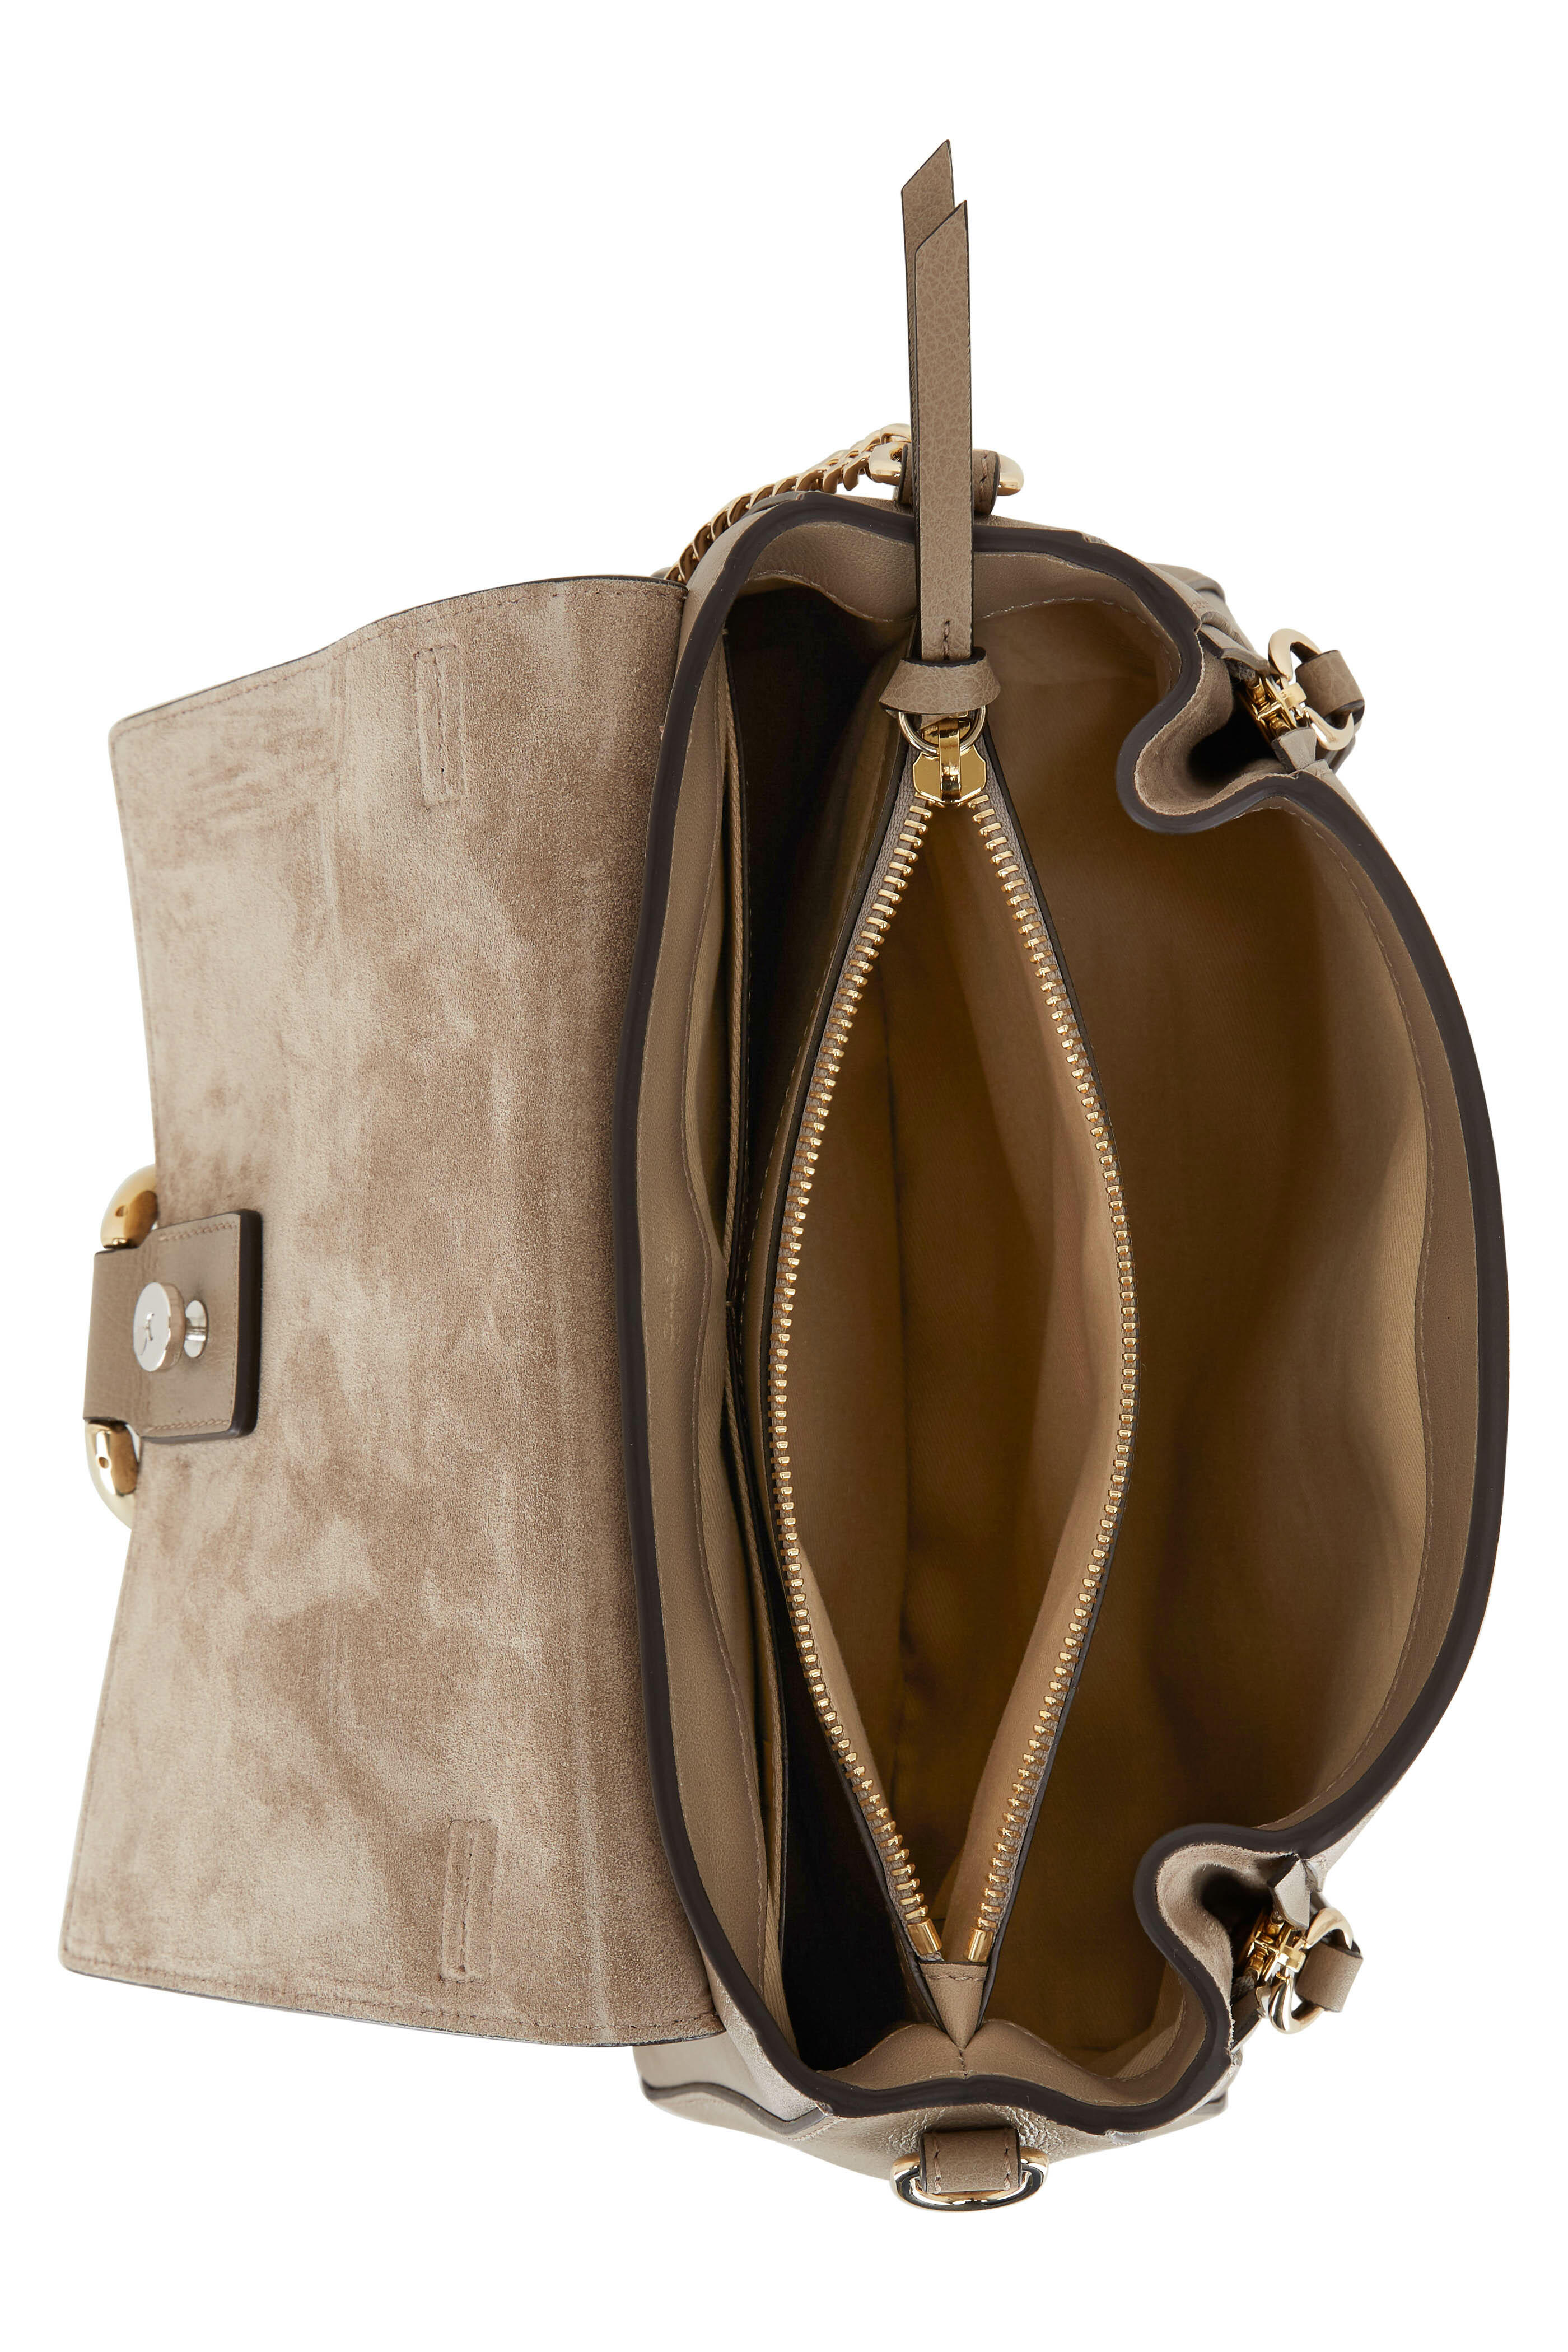 NEW! CHLOE Faye Shoulder Bag- Motty Grey $1850 SOLD OUT STYLE!